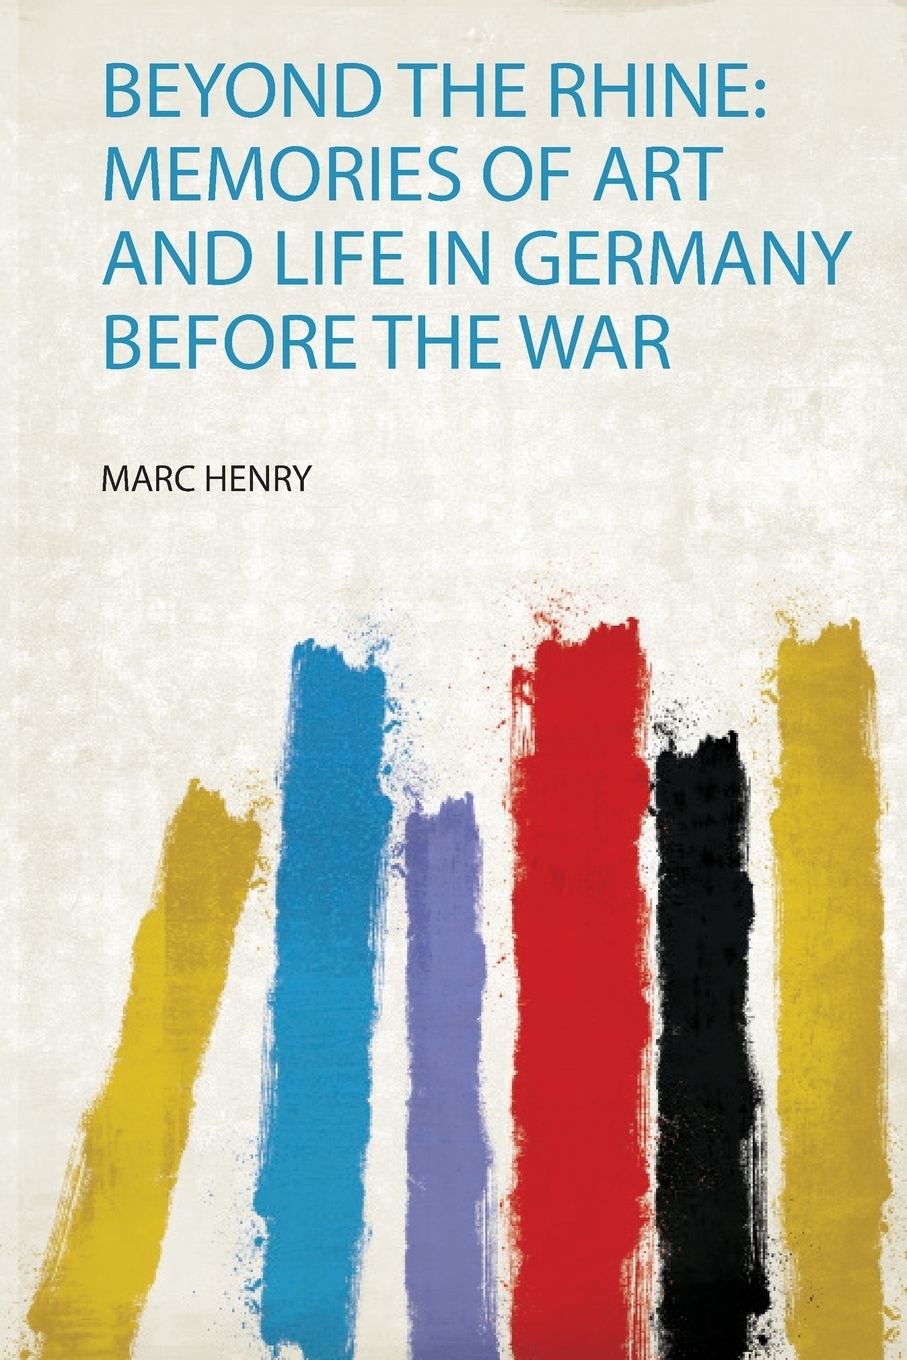 Beyond the Rhine. Memories of Art and Life in Germany Before the War